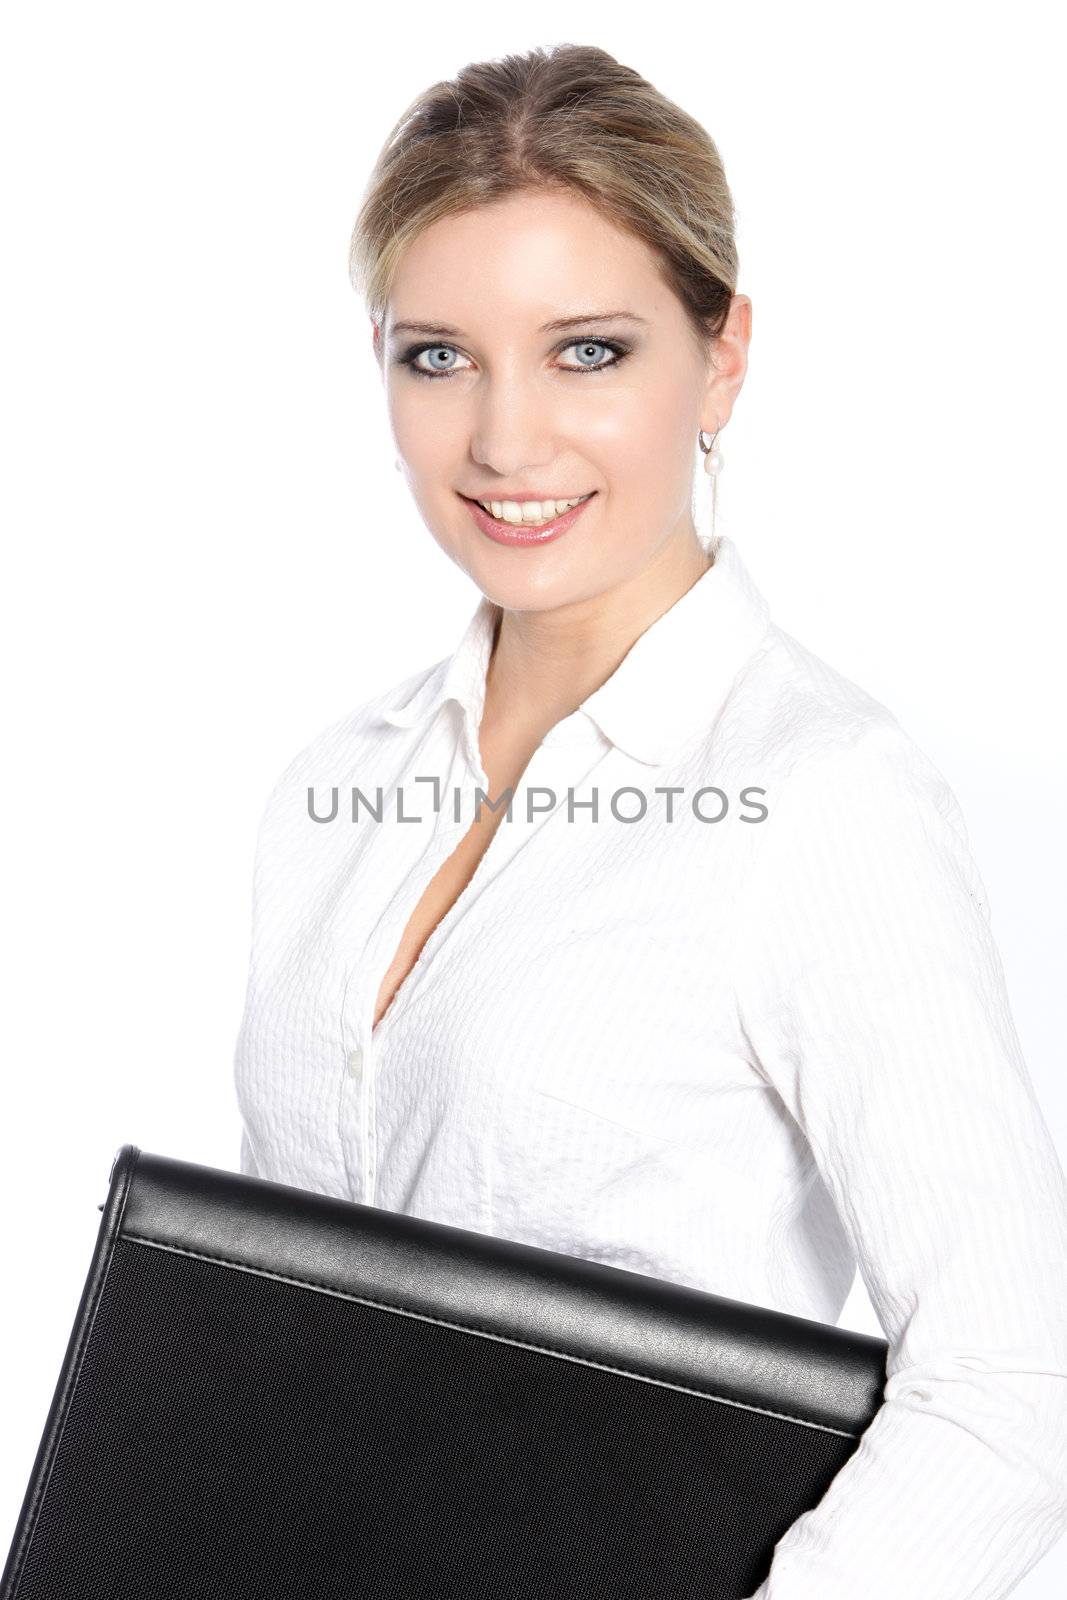 An attractive smiling blond haired business woman by Farina6000